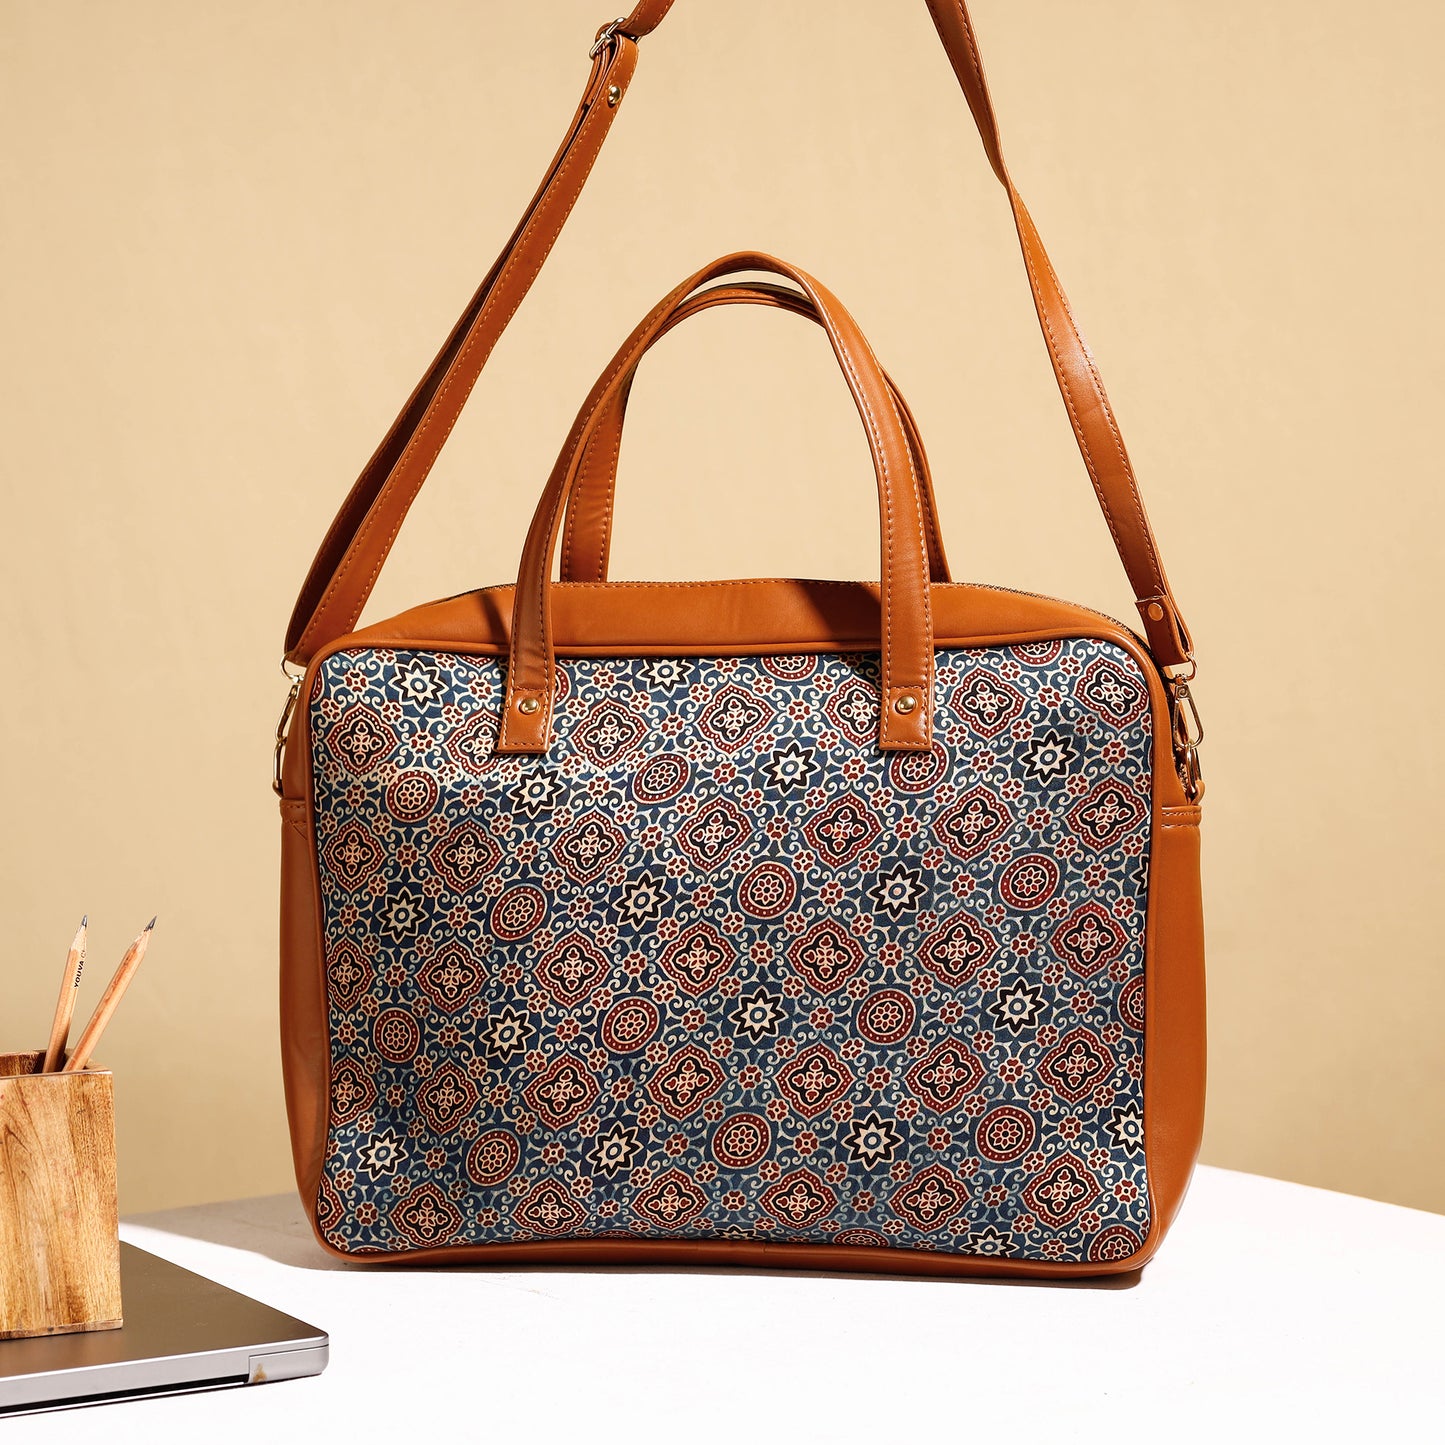 Handcrafted Ajrakh Block Printed Modal Silk Laptop Bag (15 x 13 in)